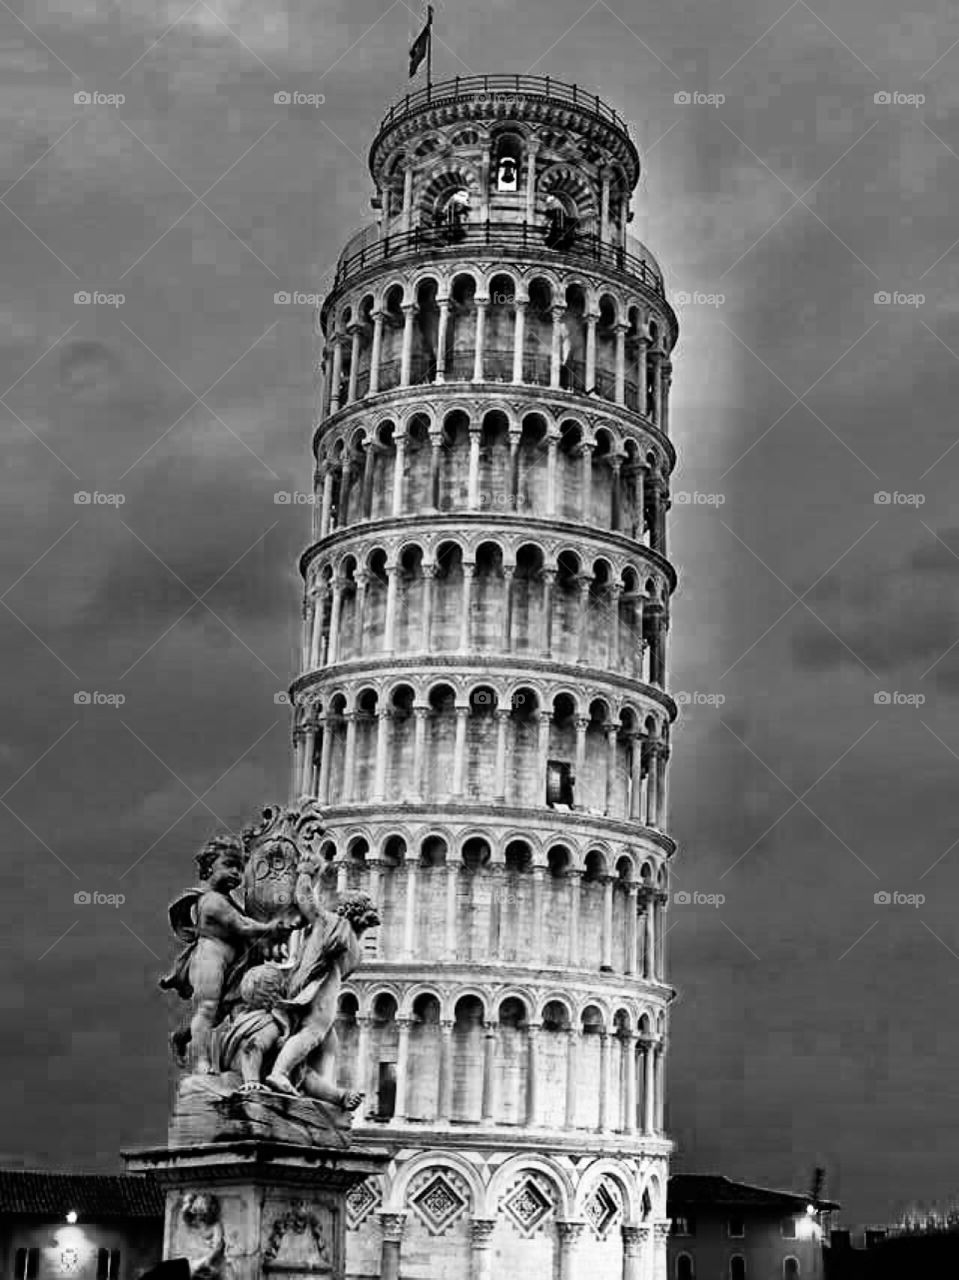 The Leaning Tower of Pisa exhibits the beauty and class even beyond it’s imperfection... I somehow find it more empowering that this Tower becomes more remarkable because of it’s leaning phase..I love it!